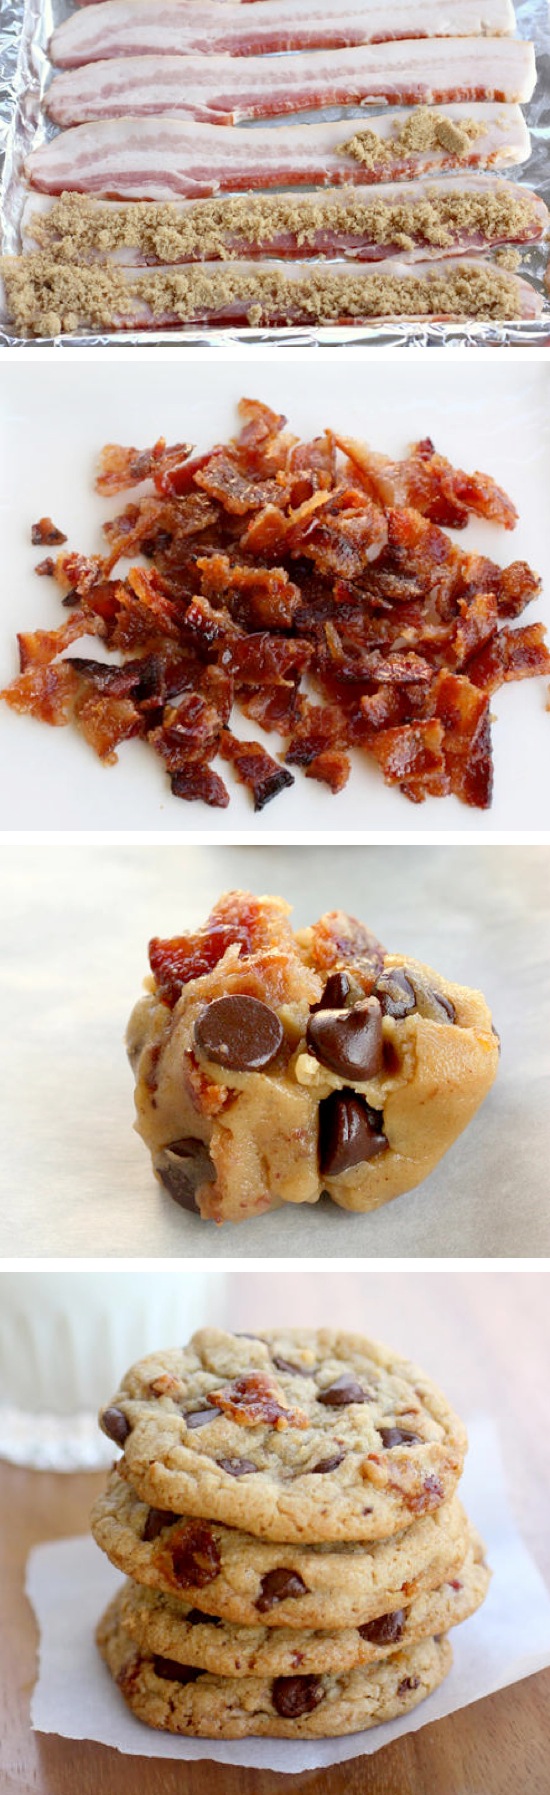 Candied-Bacon-Chocolate-Chip-Cookies